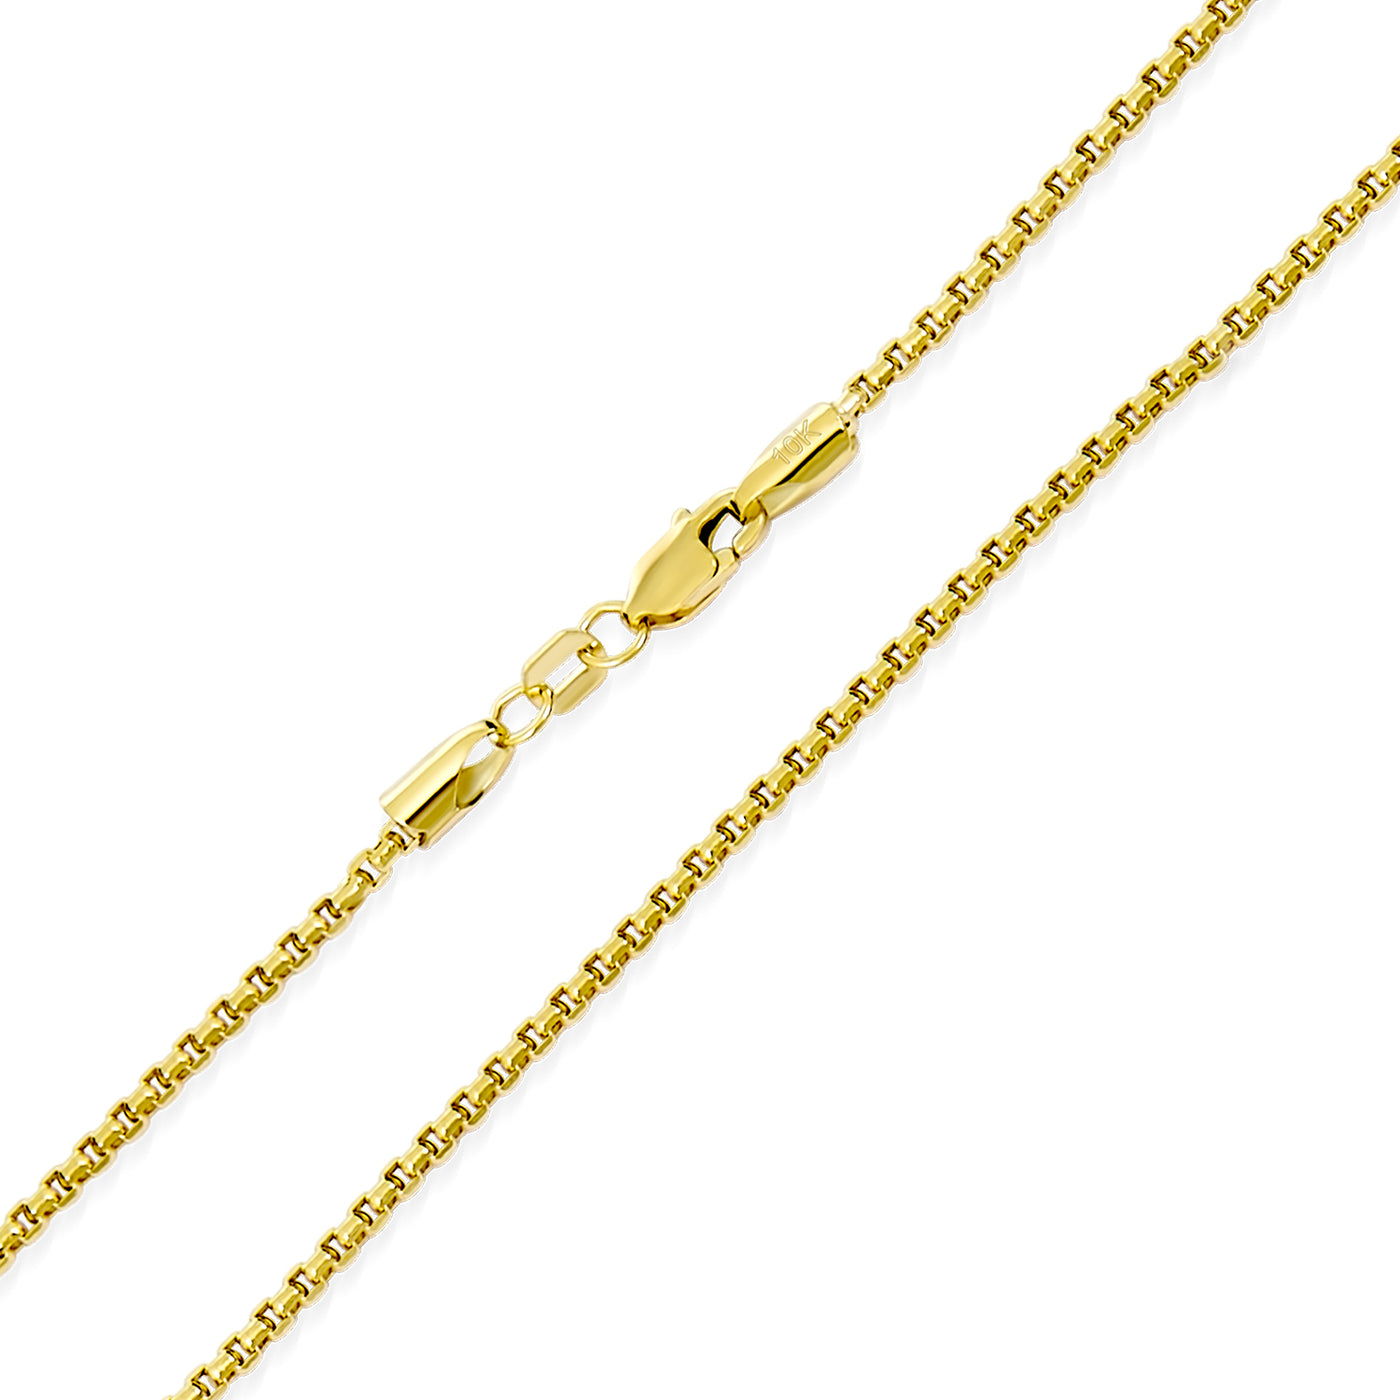 GENUINE Solid Yellow Real 10K Gold BOX Chain Necklace 100 Gauge 1.6 MM